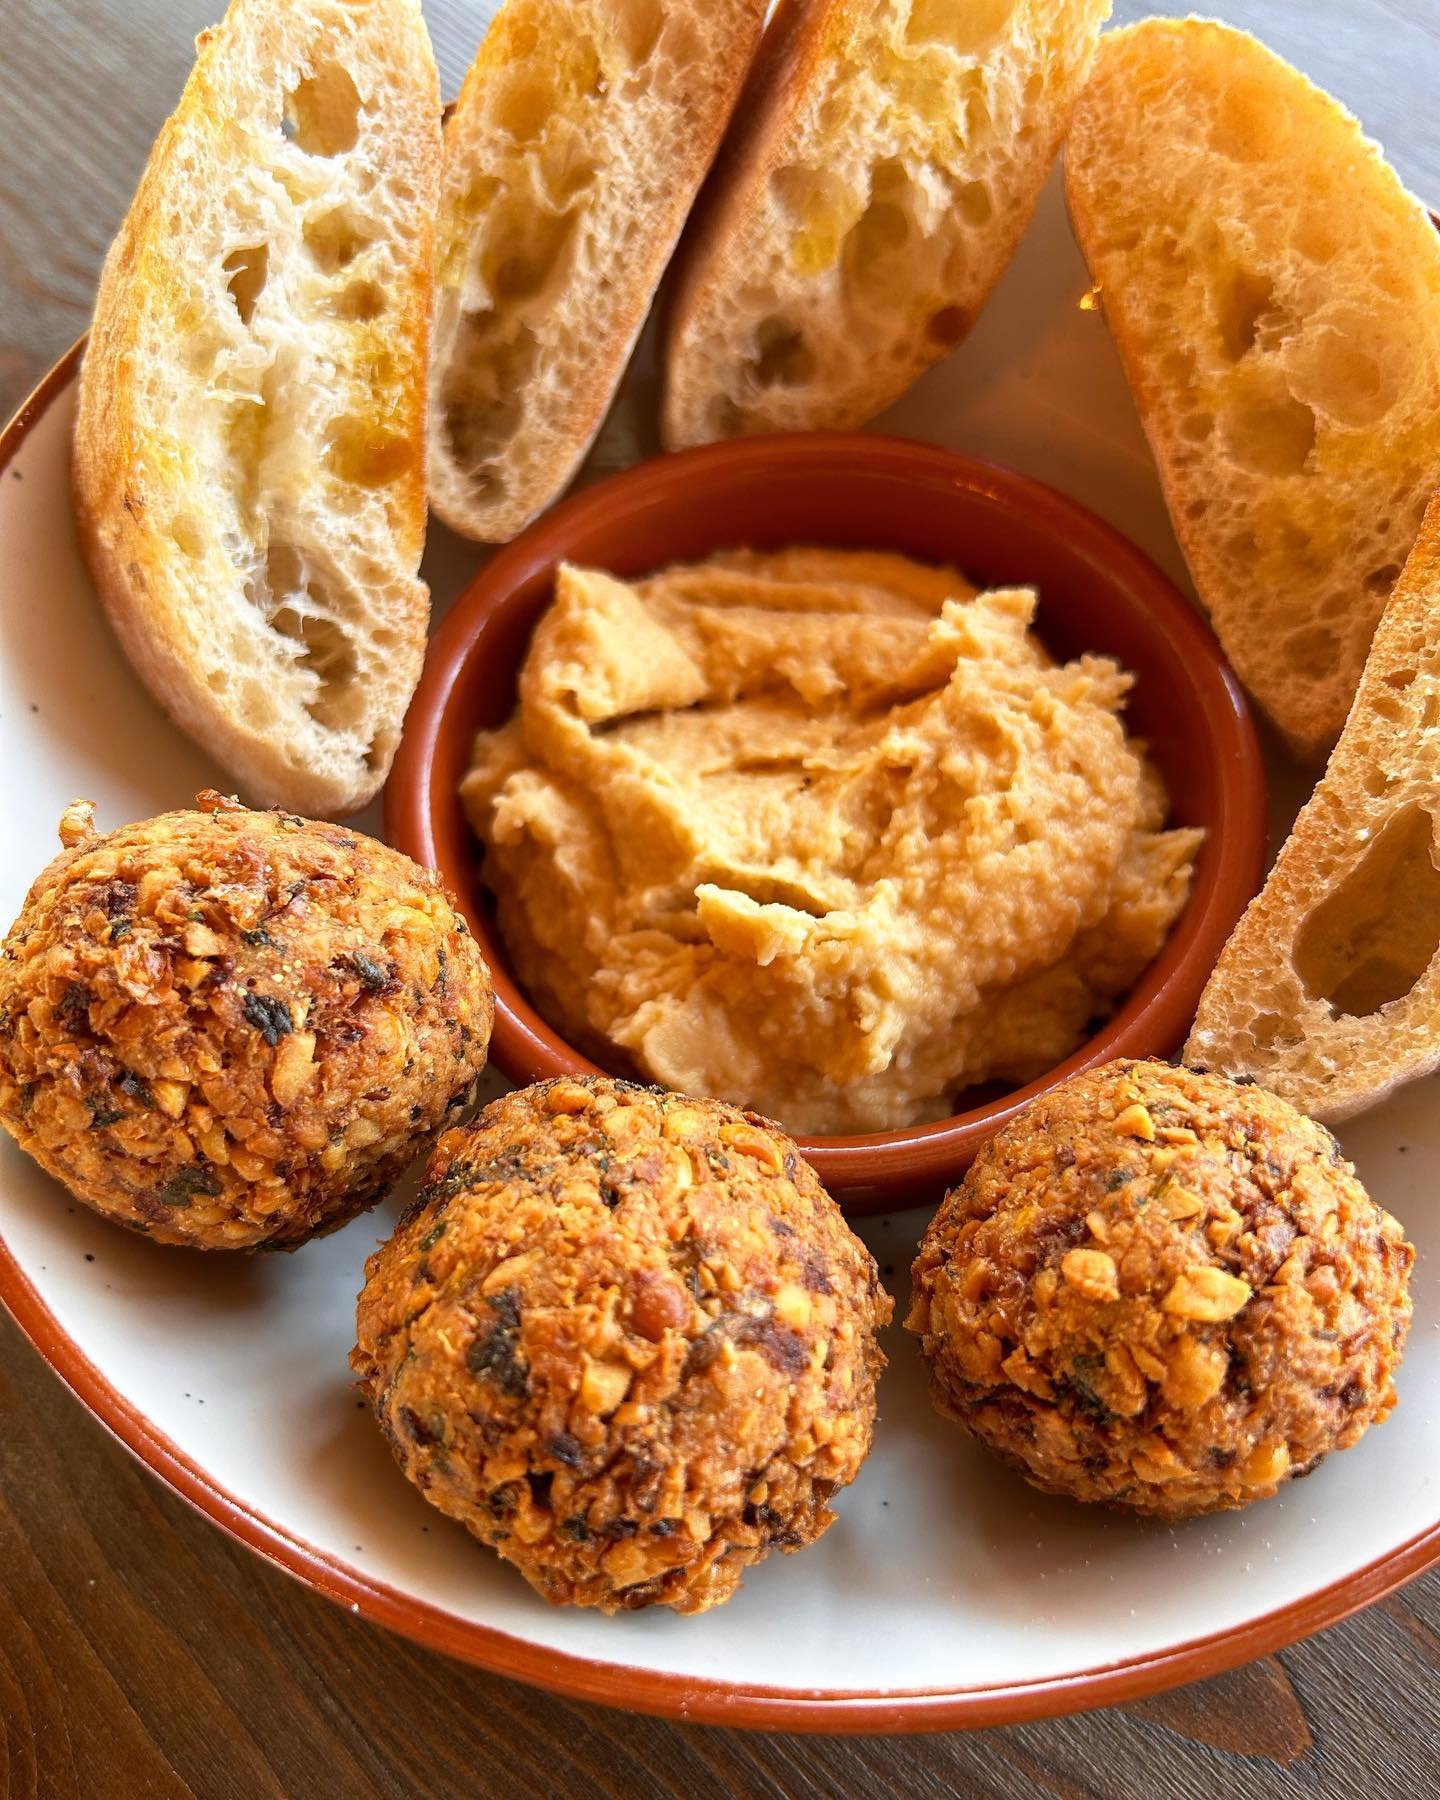 Tapas time! Our homemade hummus and falafel tapas is a must try when getting the tapas order in! 
🧆 🍞